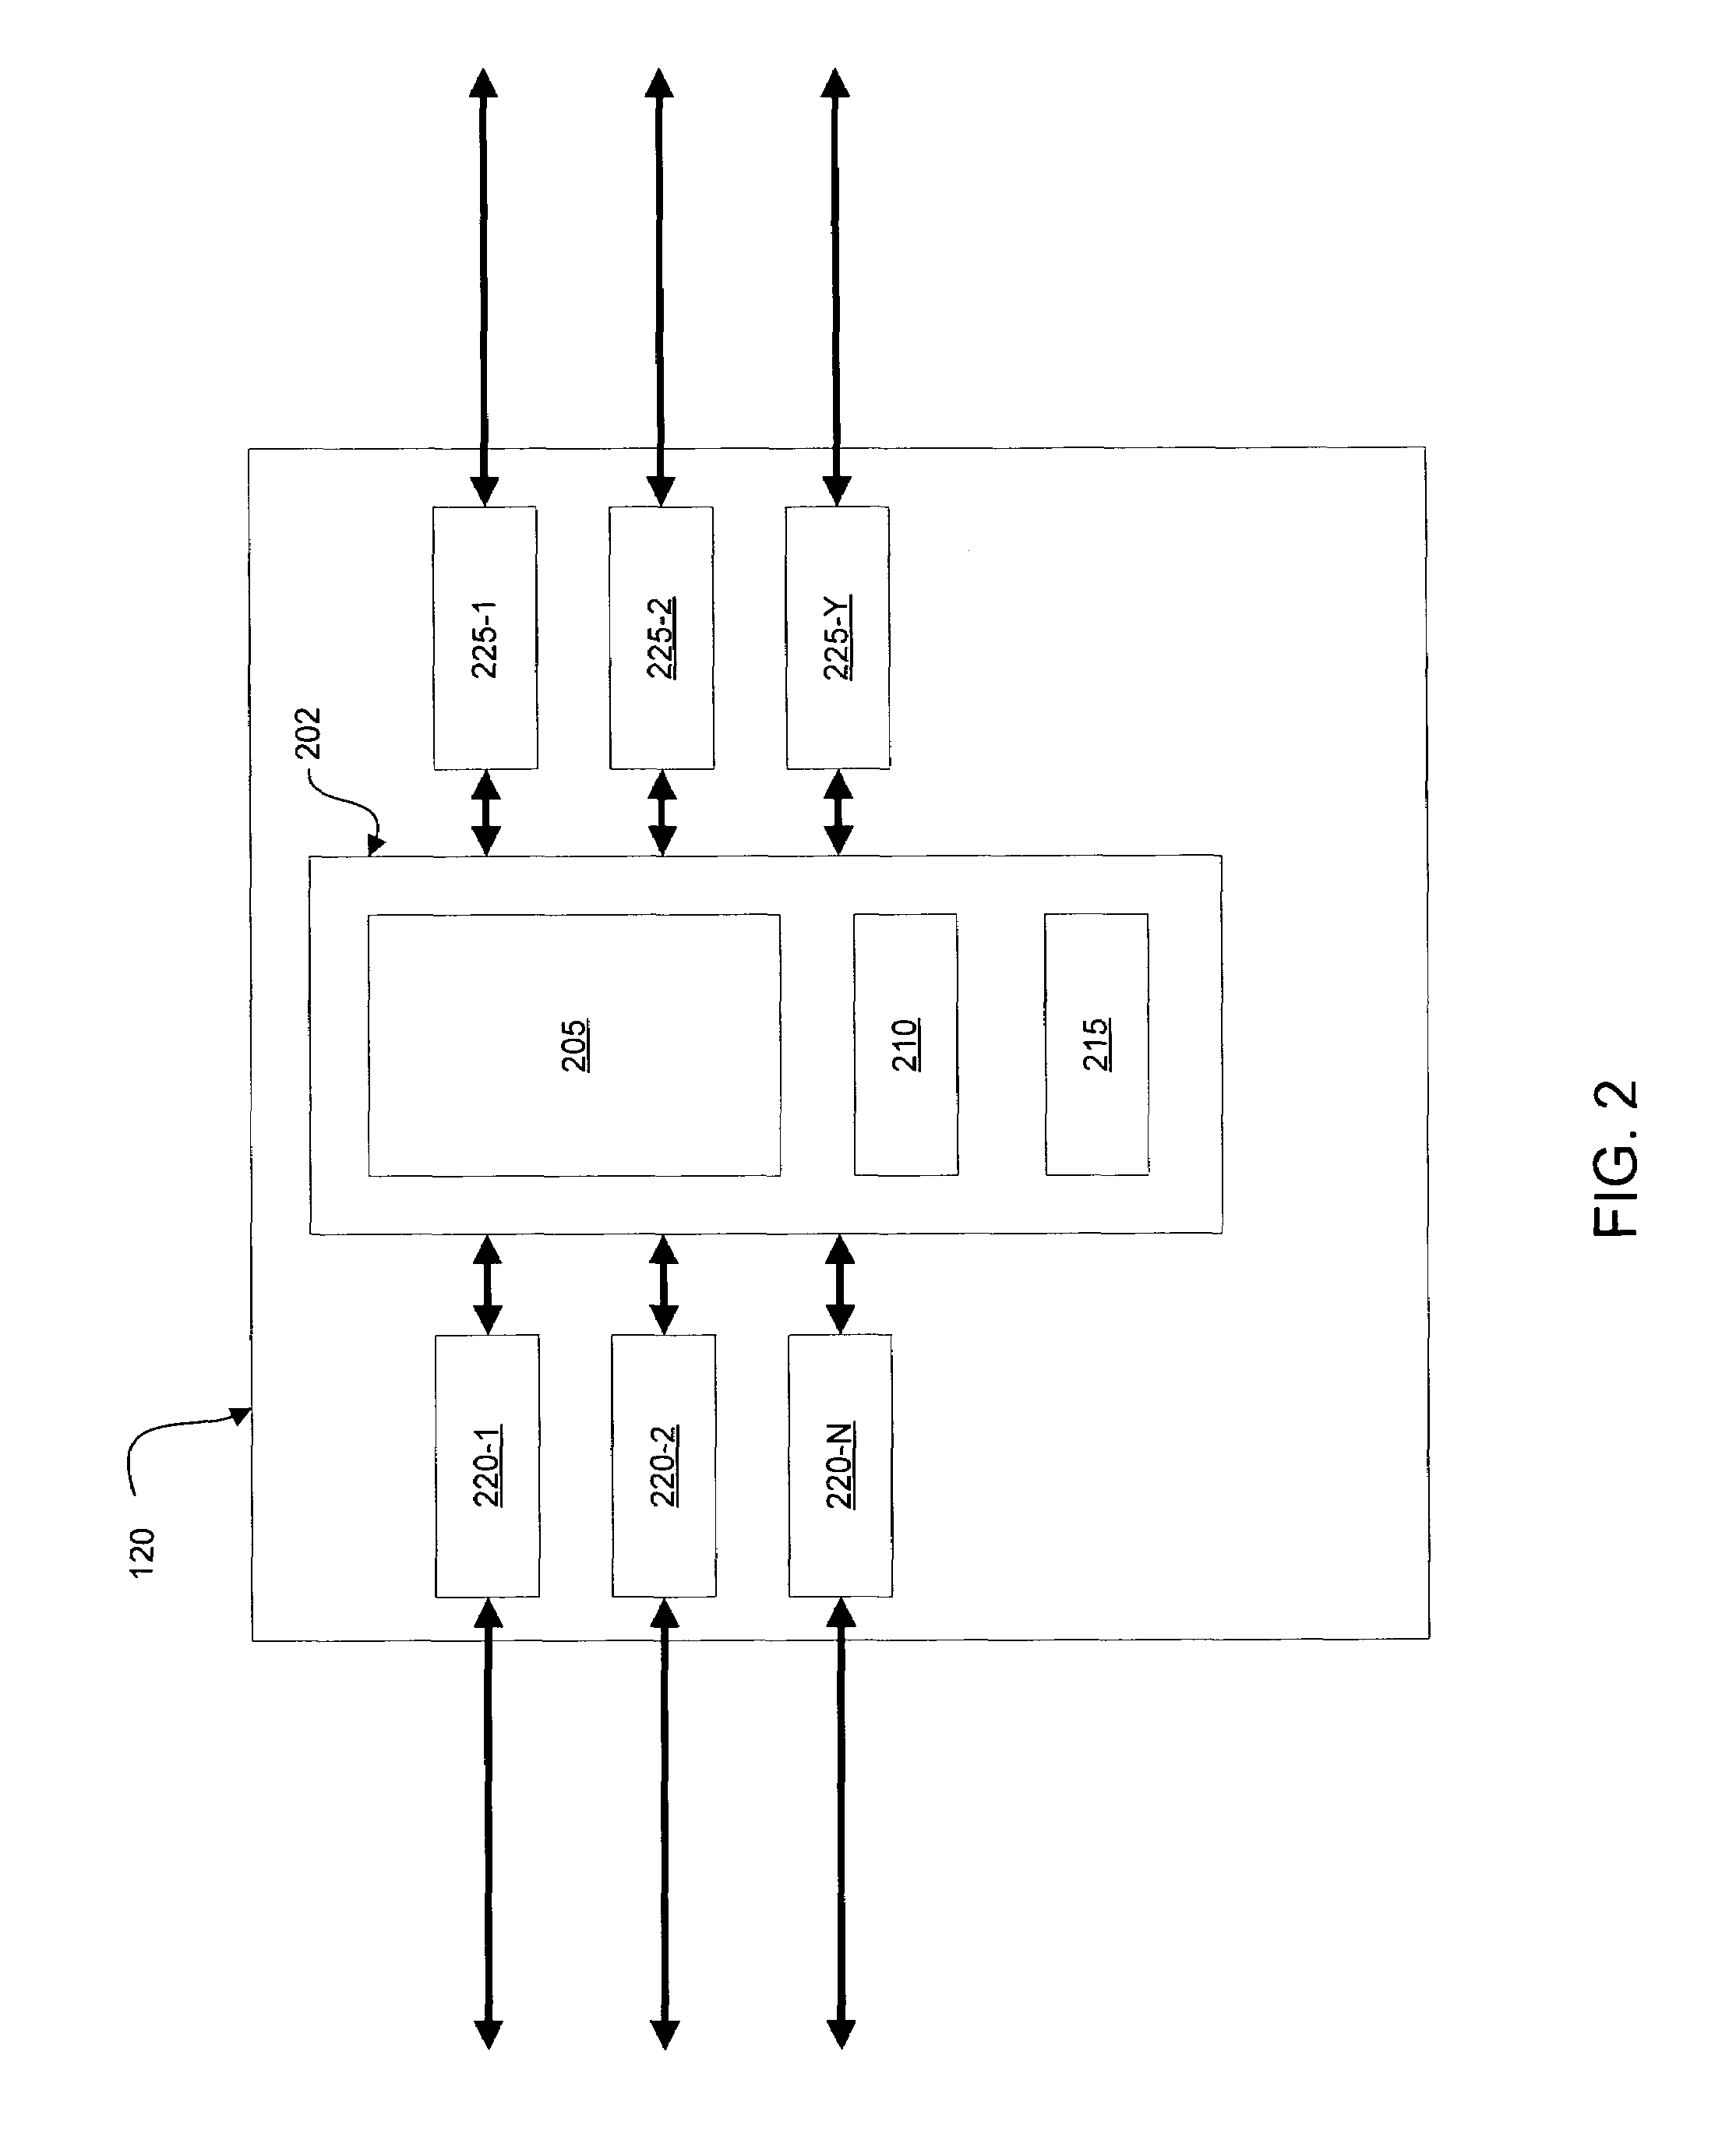 Systems and methods for providing server operations in a work machine